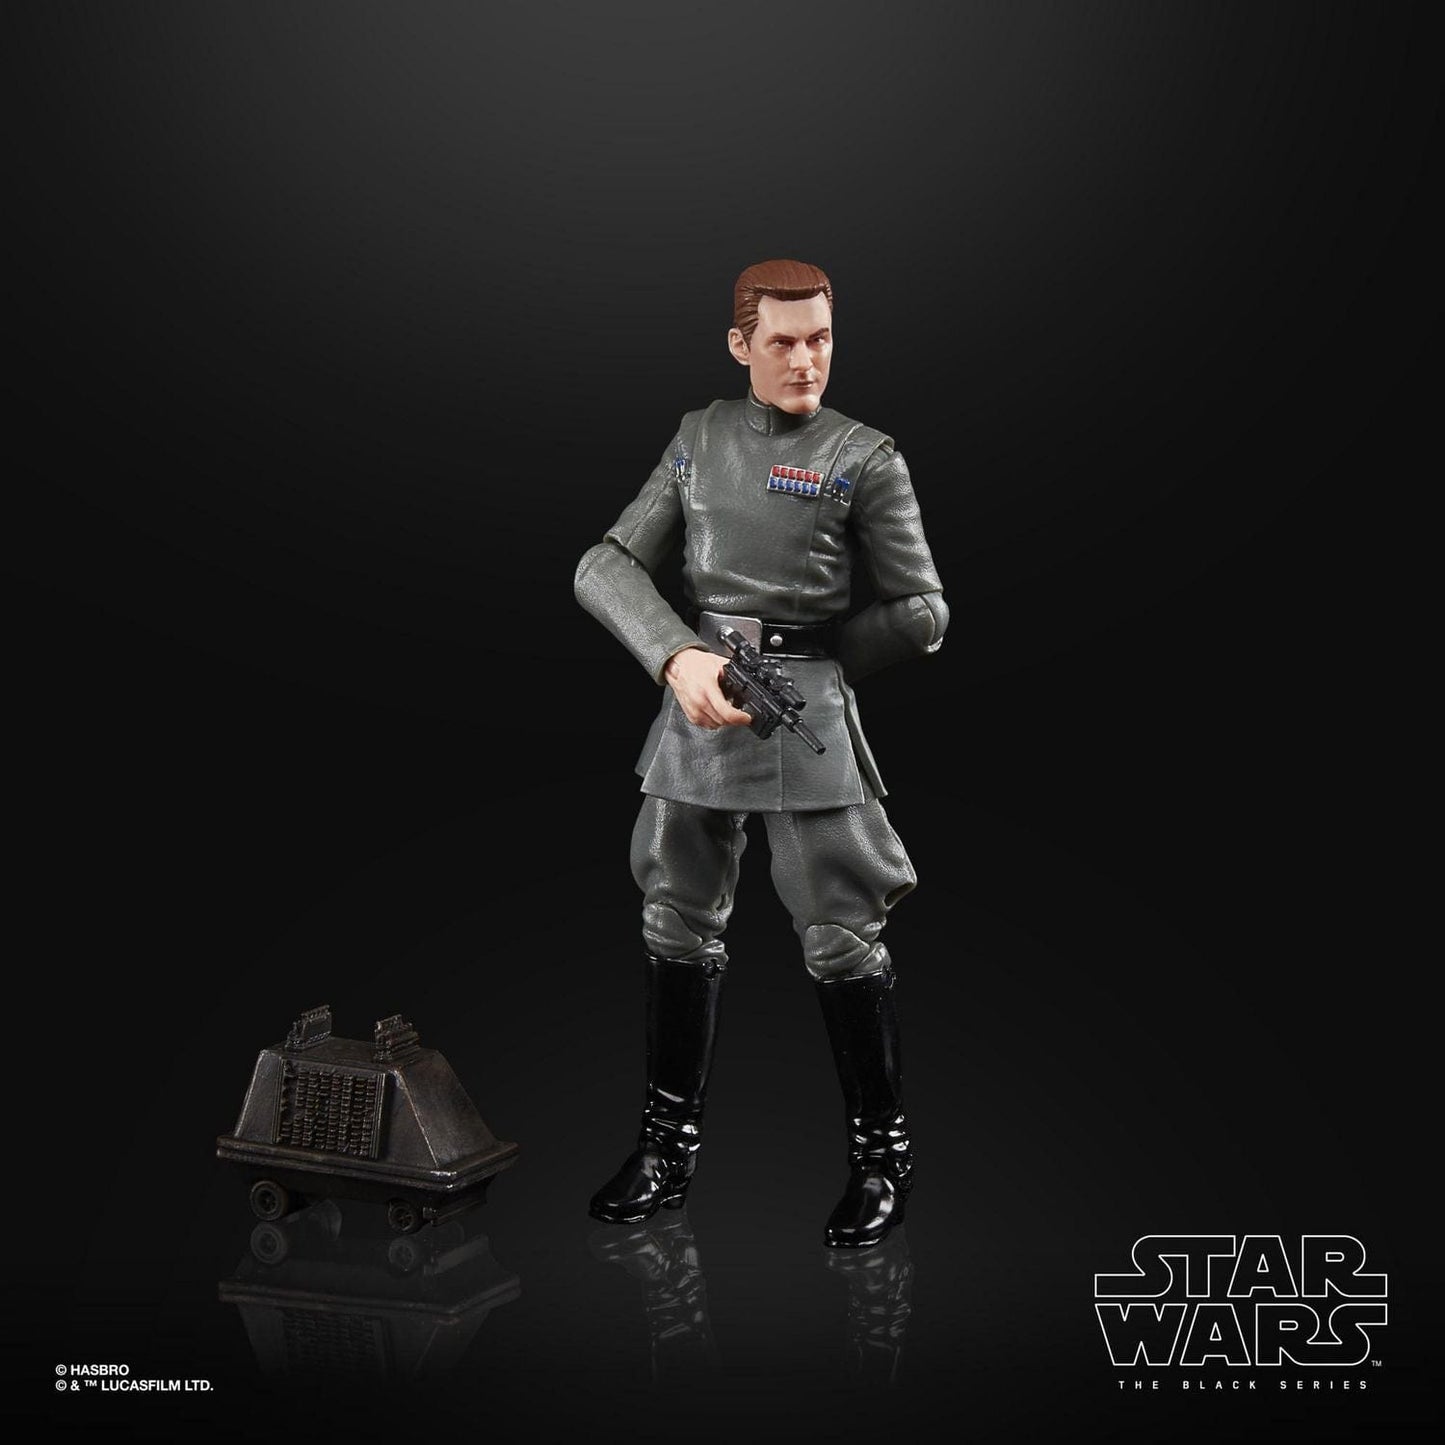 Star Wars The Black Series Vice Admiral Rampart Toy 6-Inch-Scale Star Wars: The Bad Batch Collectible Action Figure - 1